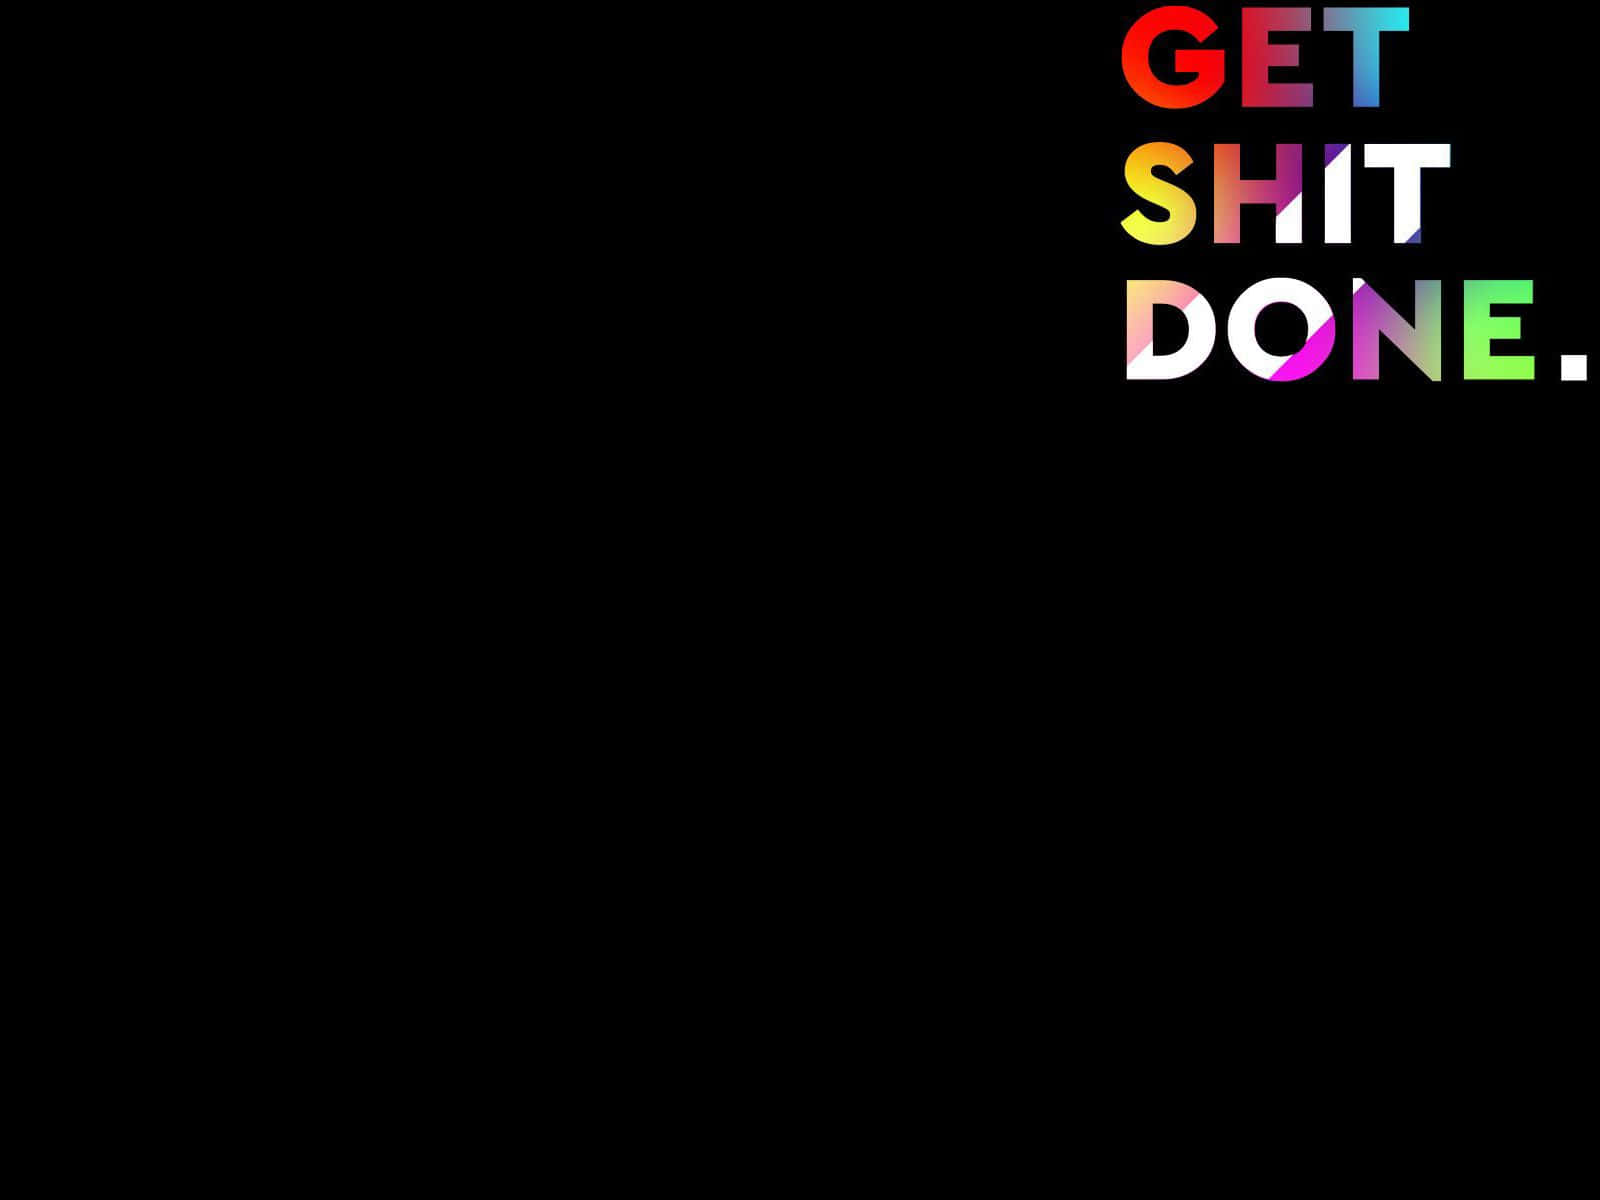 Power Through With "Get Shit Done" Wallpaper